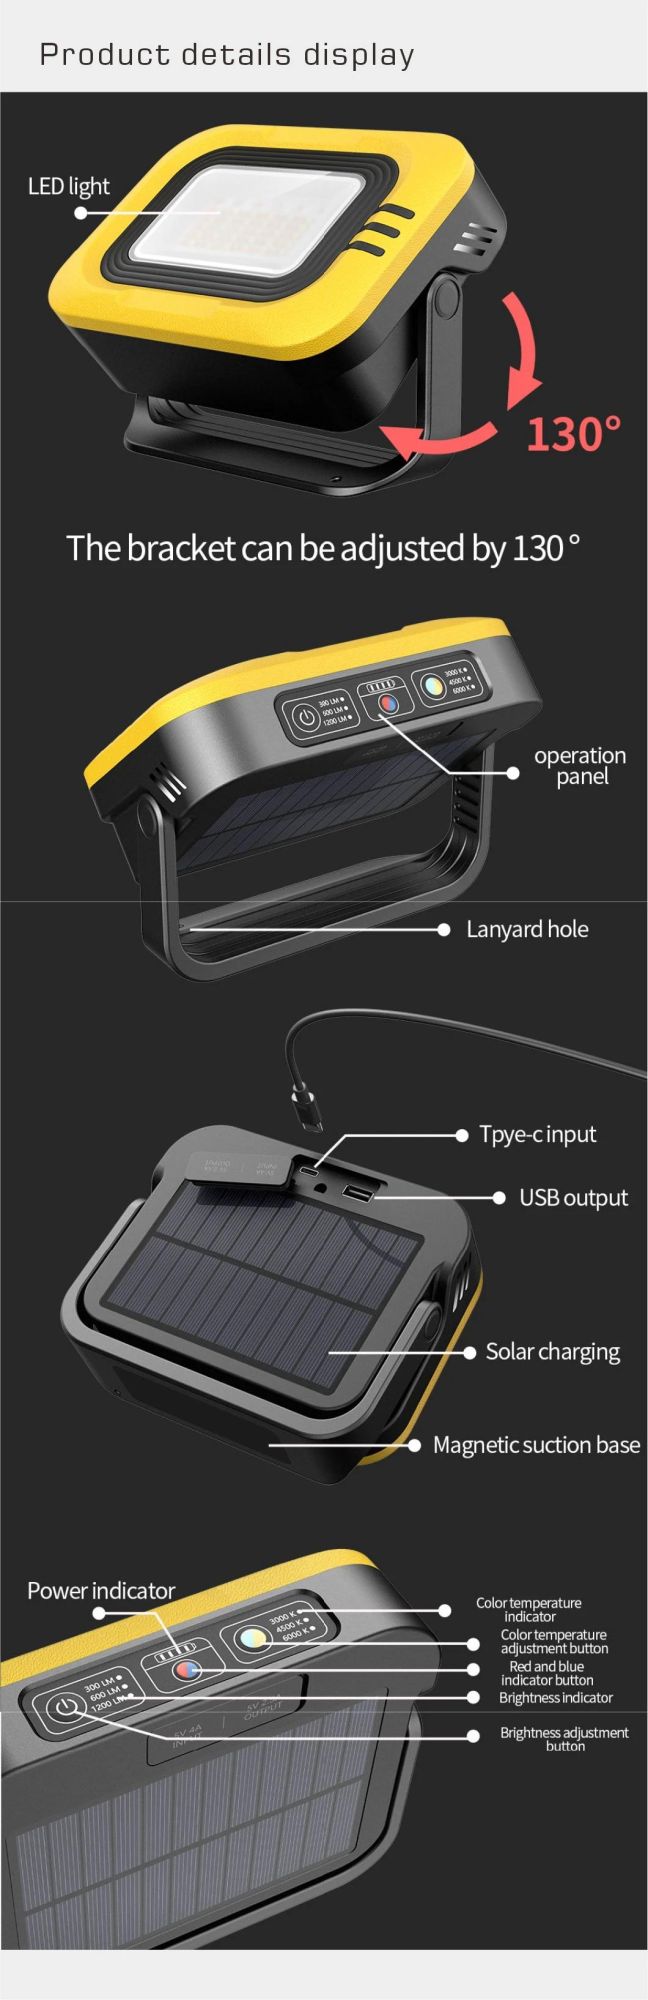 2021 New Design Portable Rechargeable LED Solar Camping Light for Outdoor